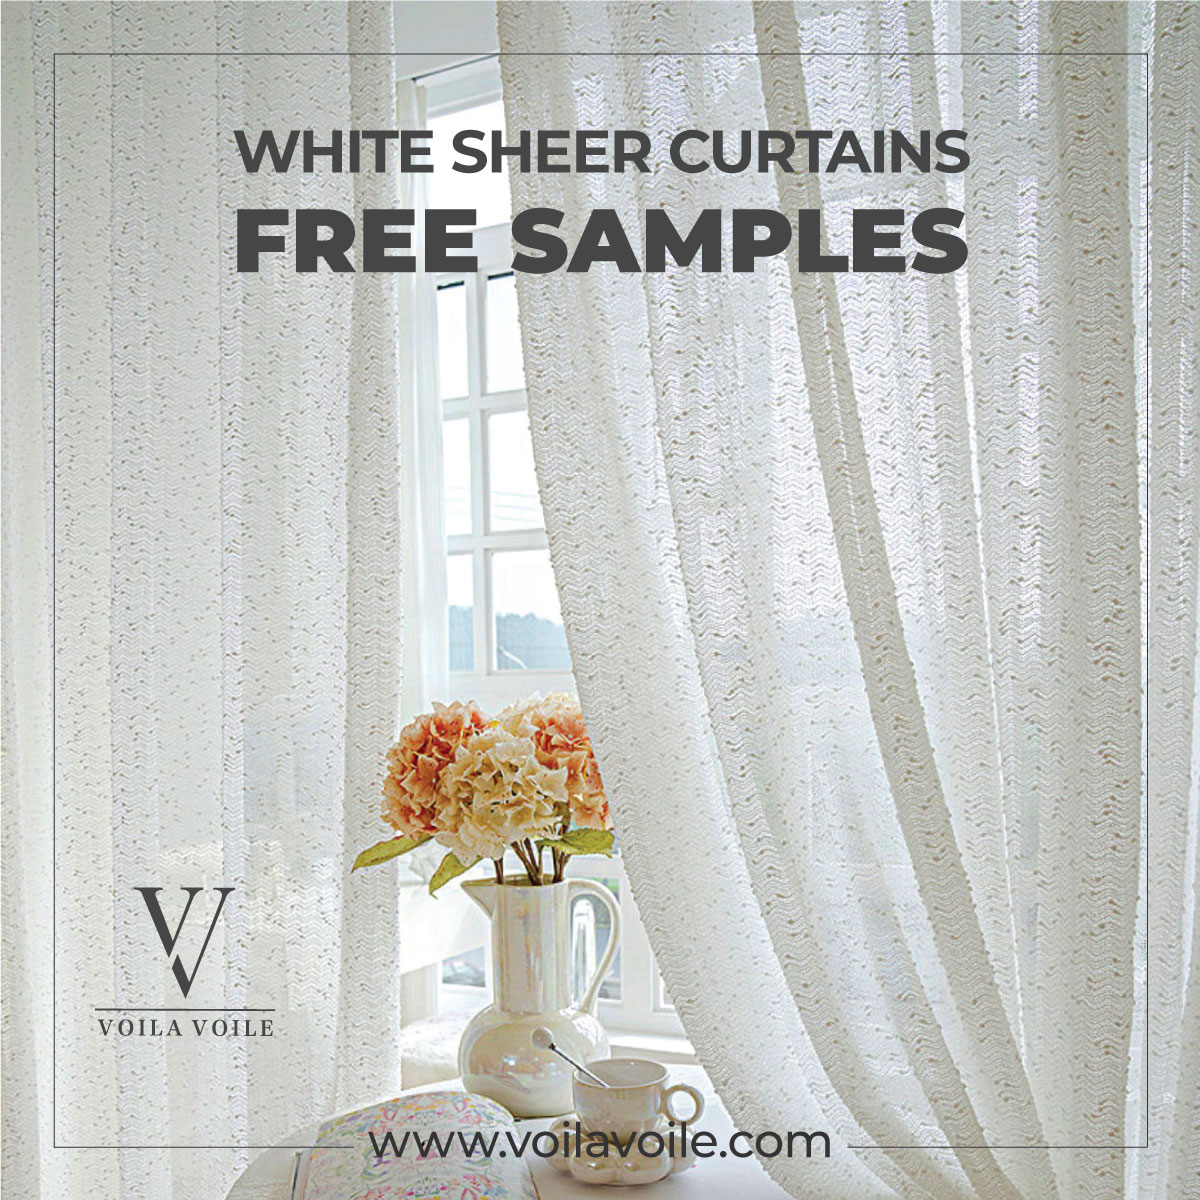 Popular Voile Curtain Patterns and Styles for Every Room